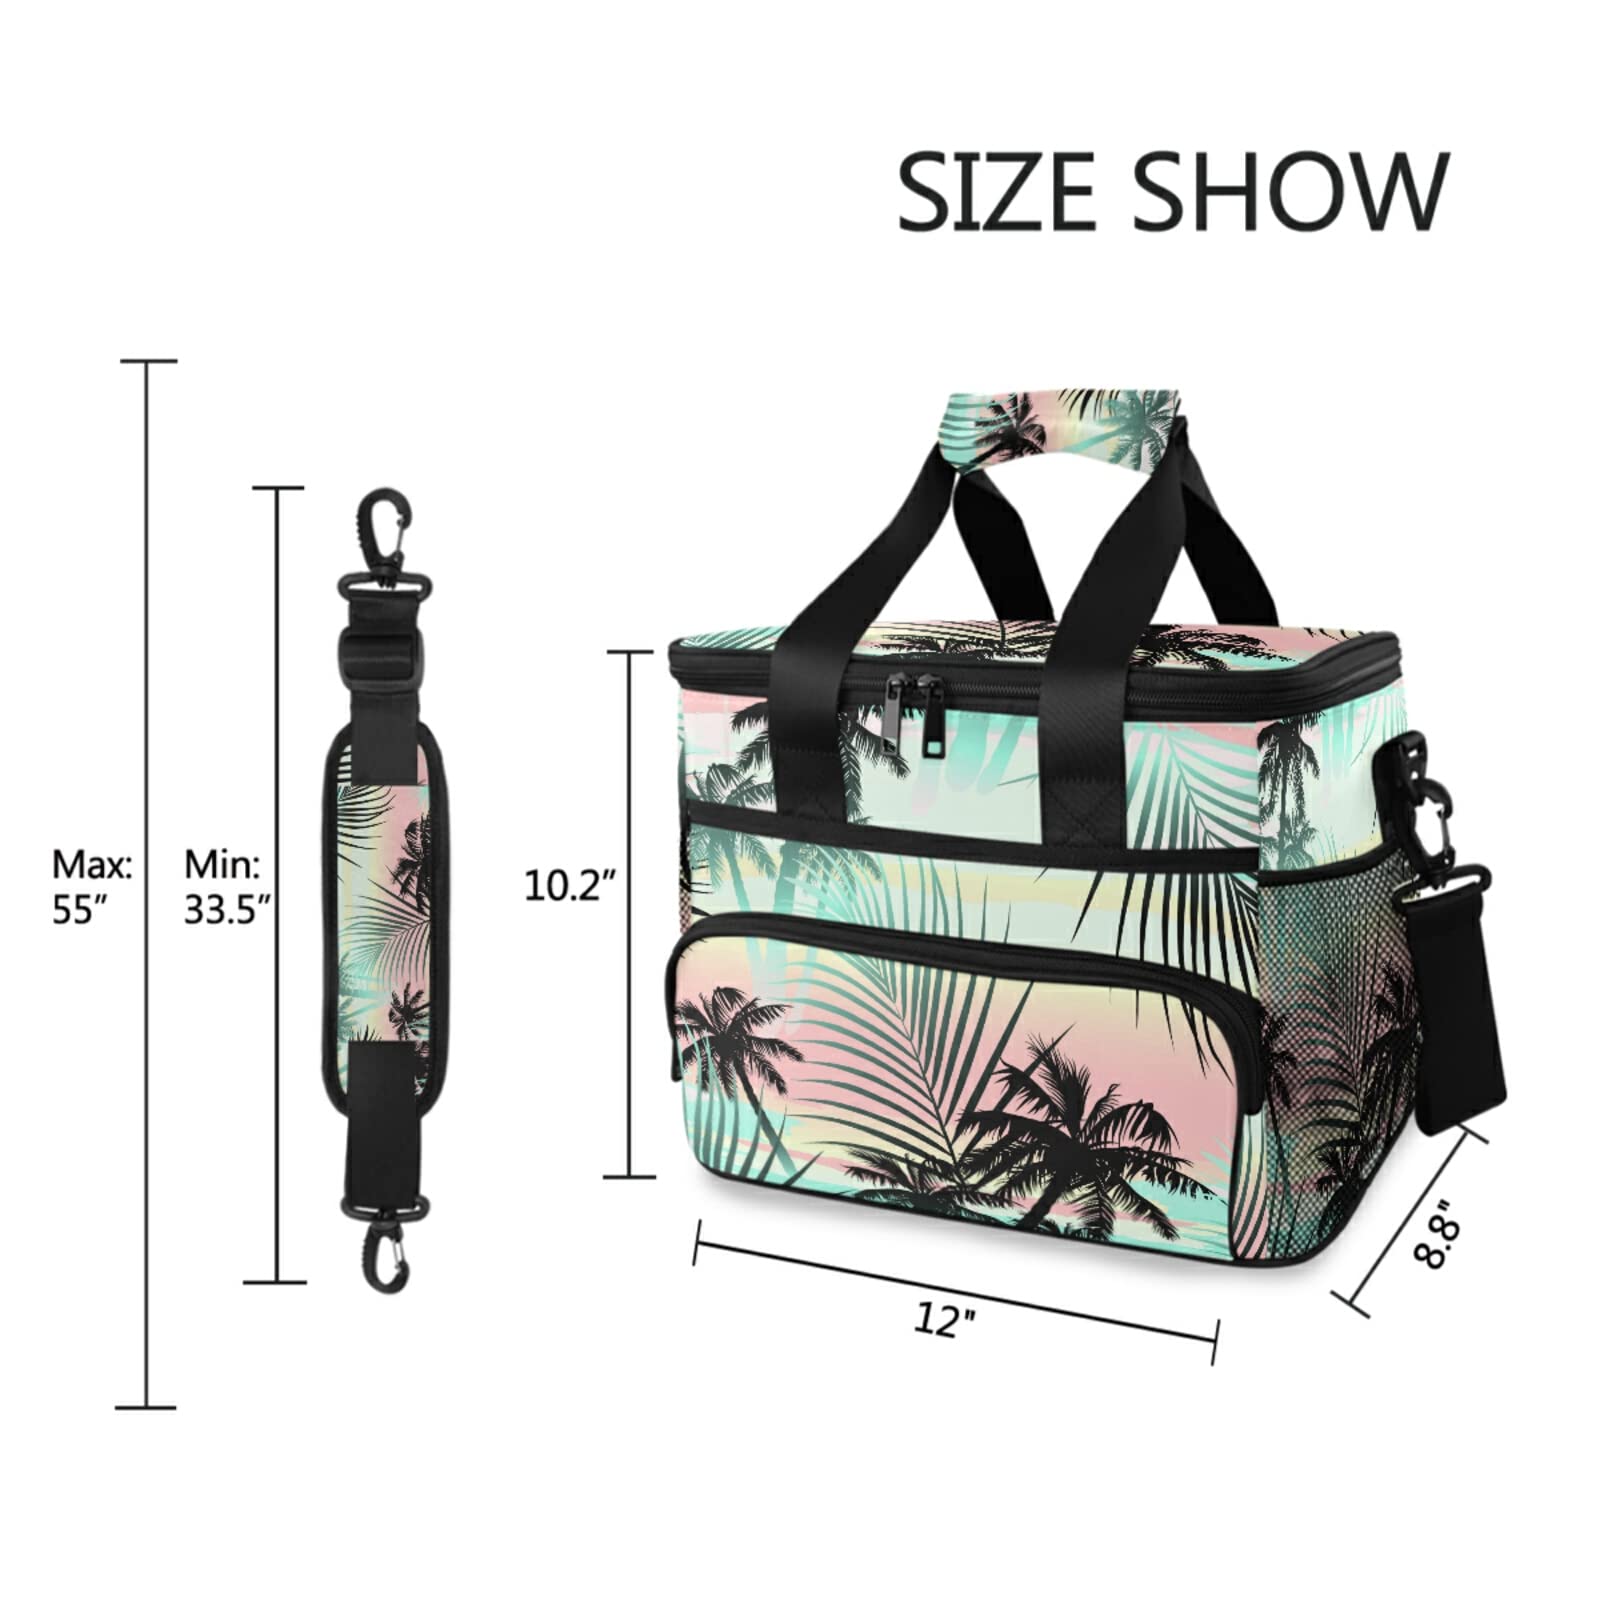 OTVEE Tropical Summer Palm Trees Lunch Bag Tote Large Picnic Reusable Insulated Cooler Lunch Box with Adjustable Shoulder Strap